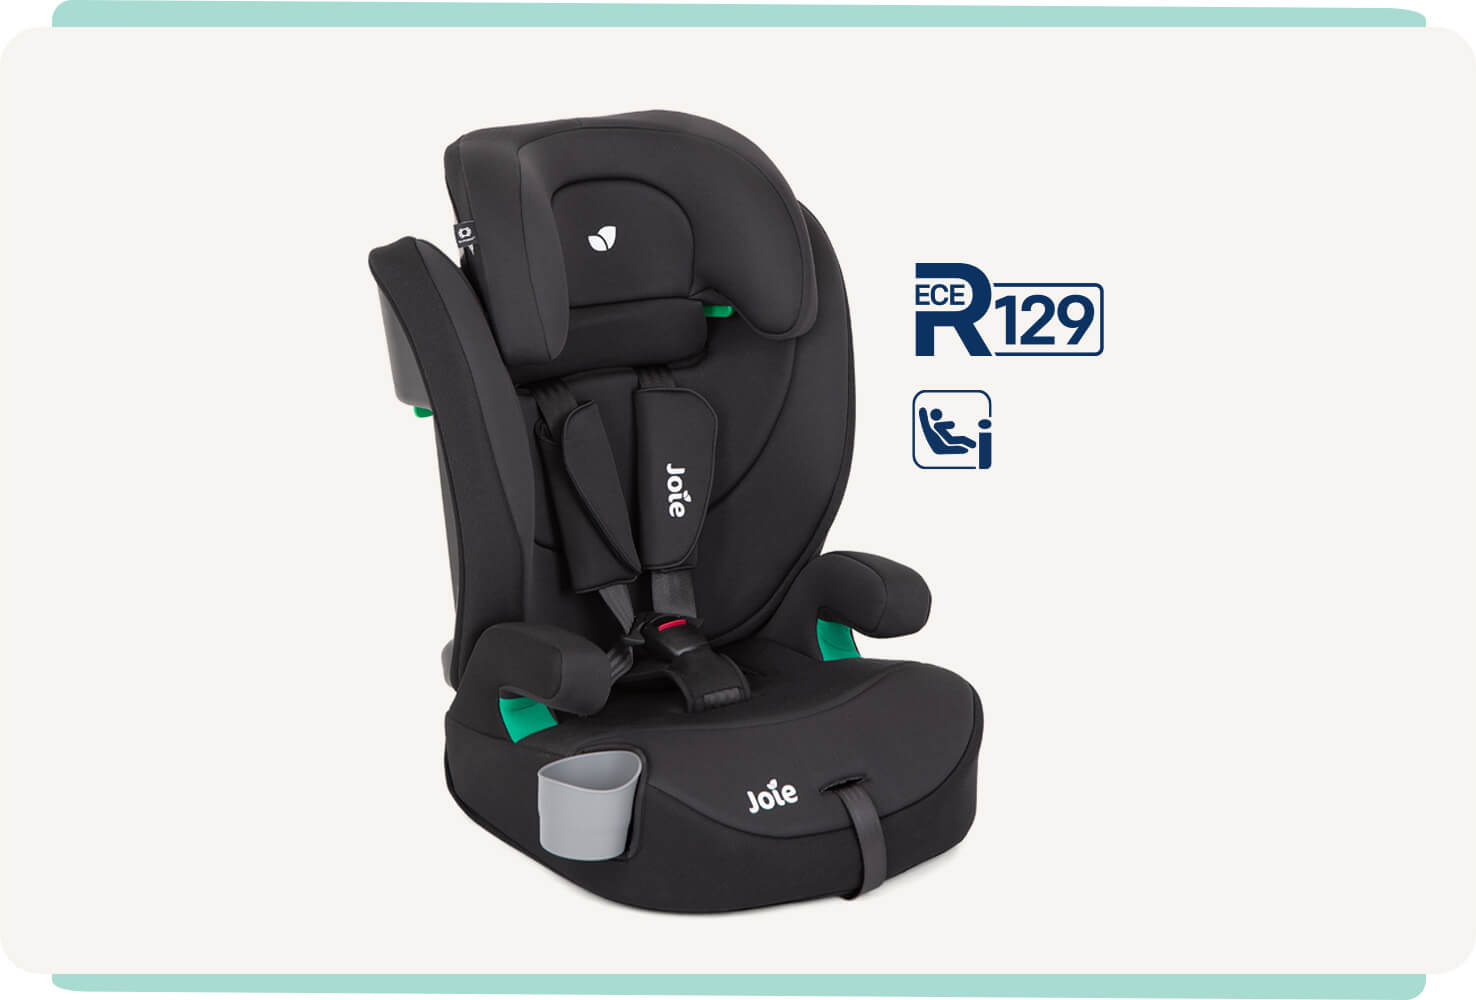  Joie elevate R129 car seat in shale at an angle with the i-Size and R129 icons.